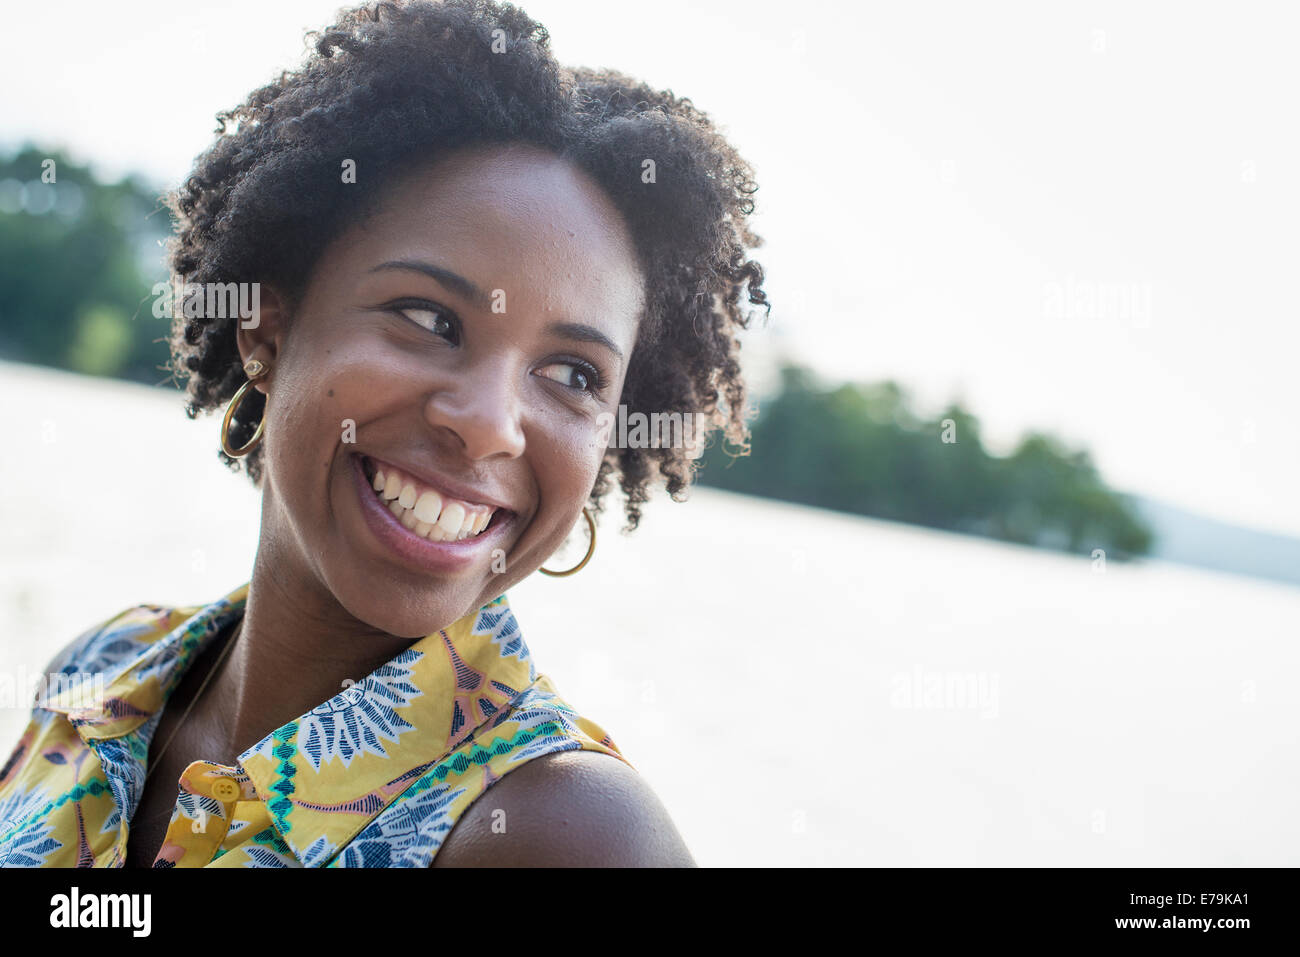 A woman smiling and laughing on a lake shore. Stock Photo